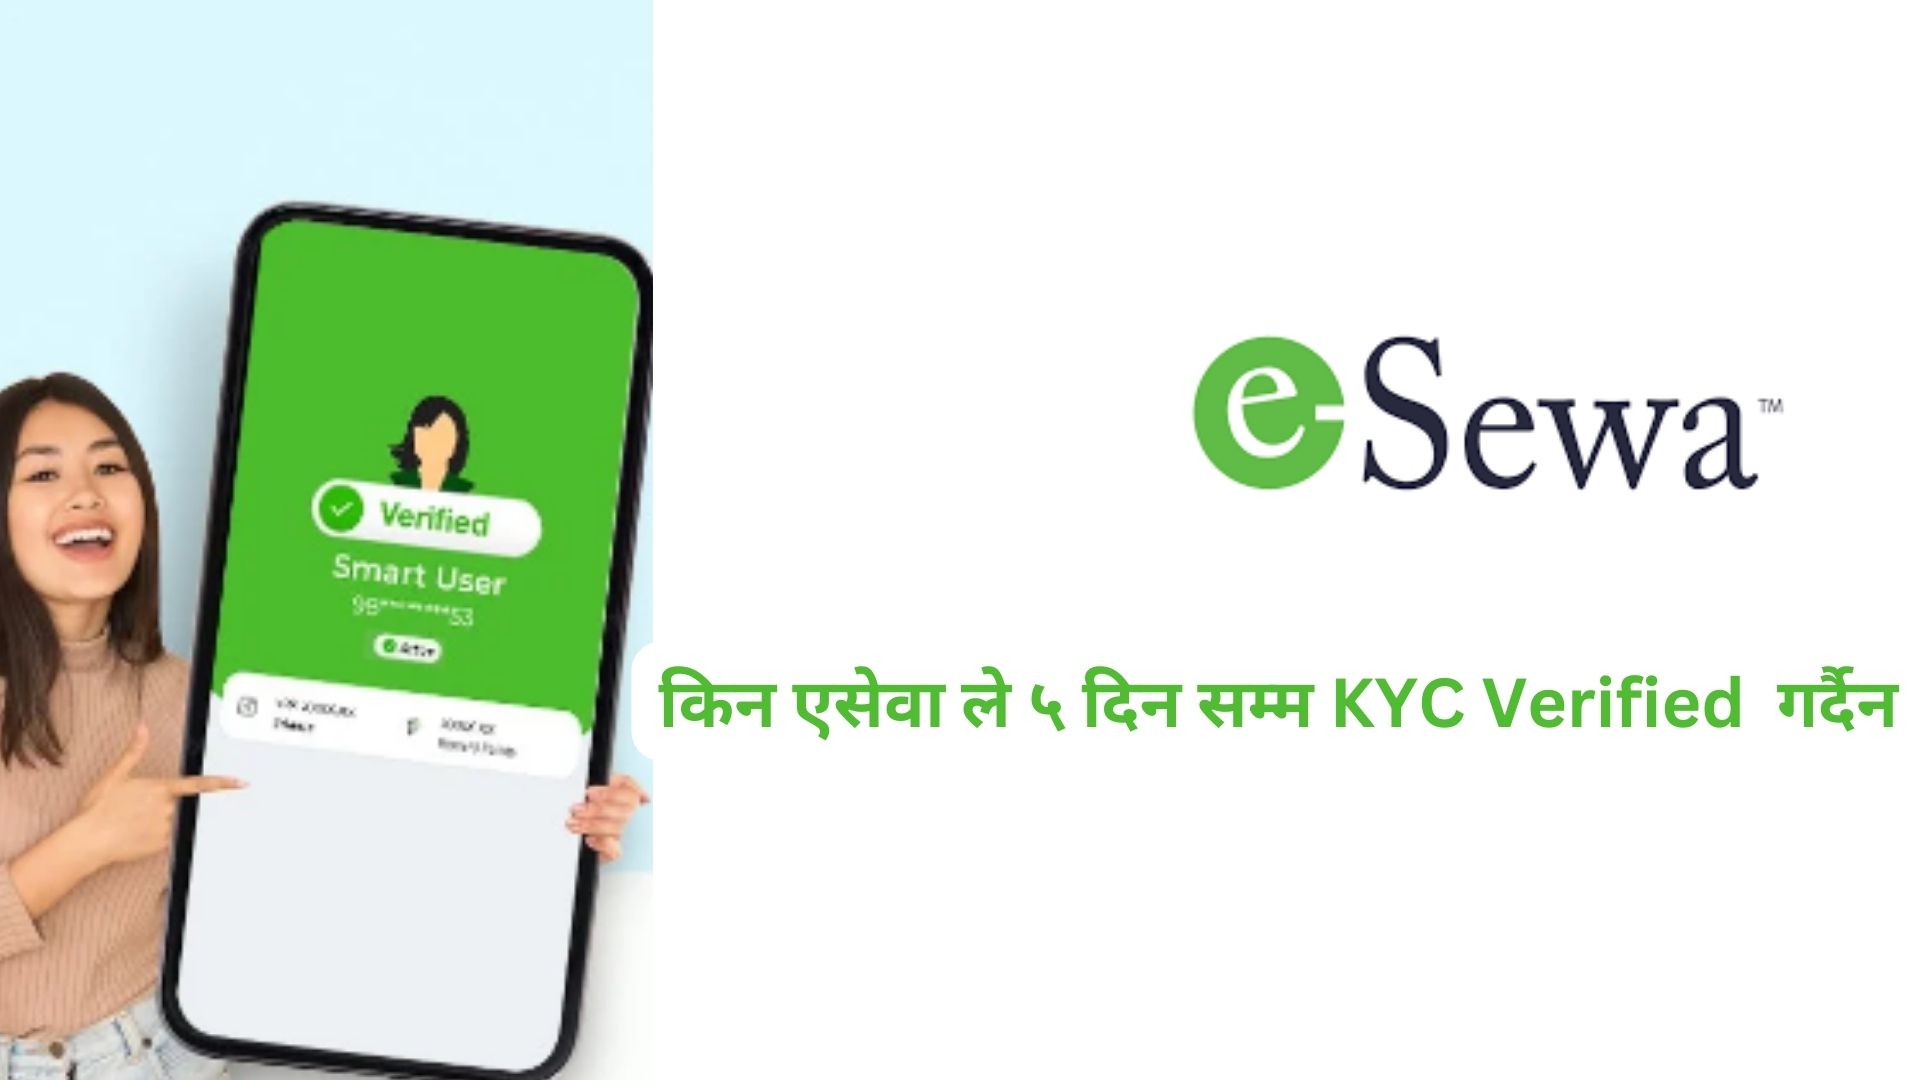 Why eSewa doesn't Verify KYC for 5 Day